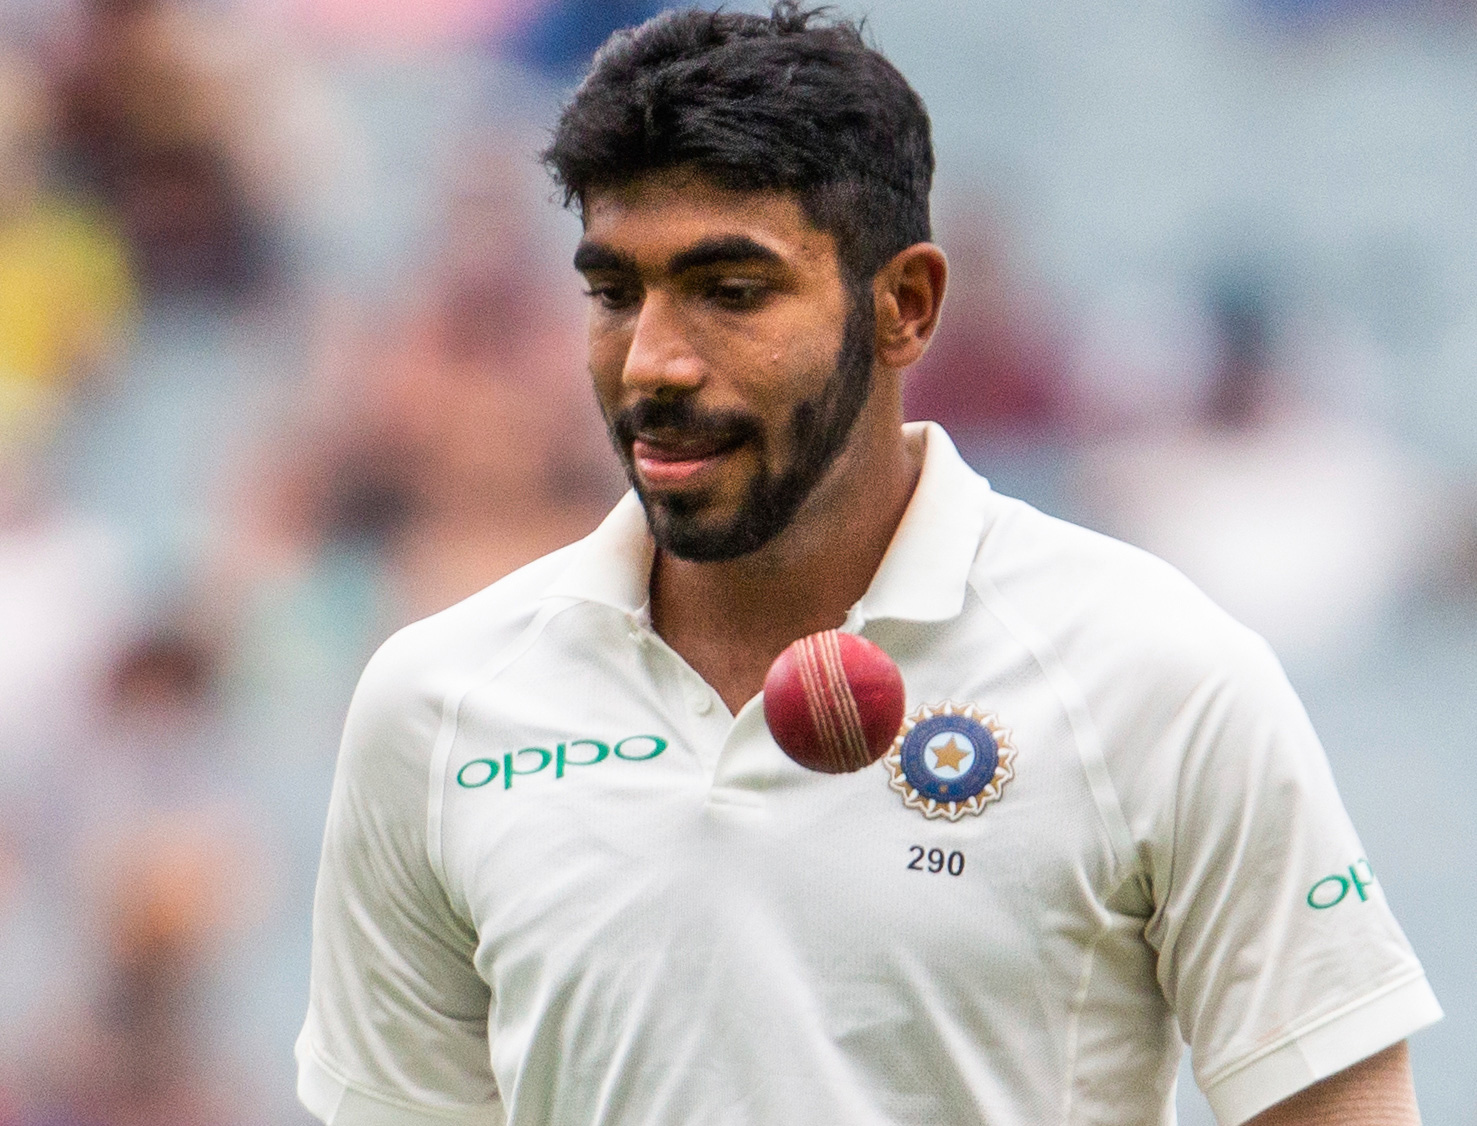 Former Australia cricketer Brad Hodge called Jasprit Bumrah “a nightmare to face”.